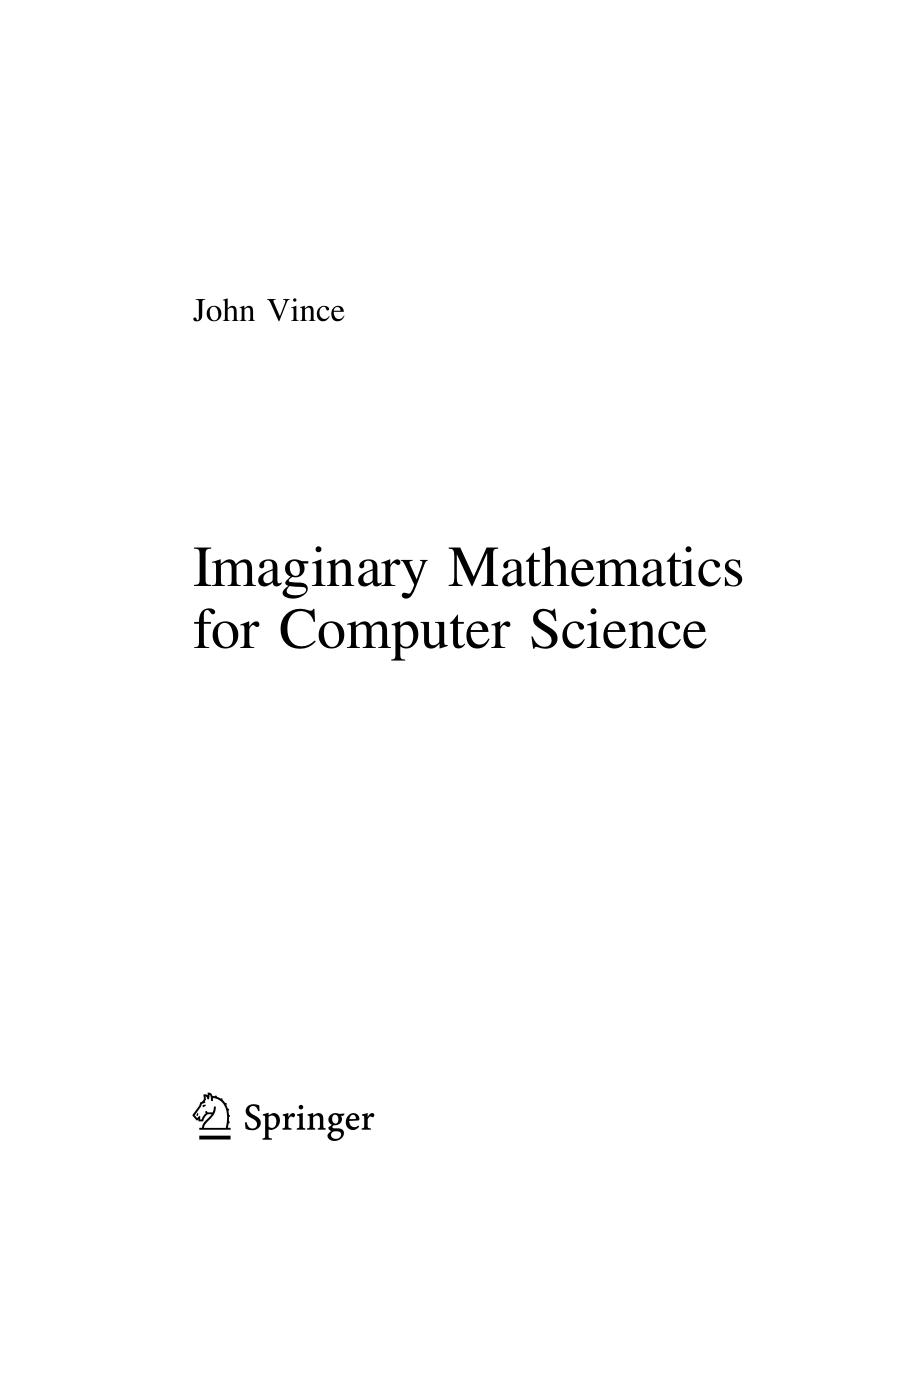 Imaginary Mathematics for Computer Science by John Vince